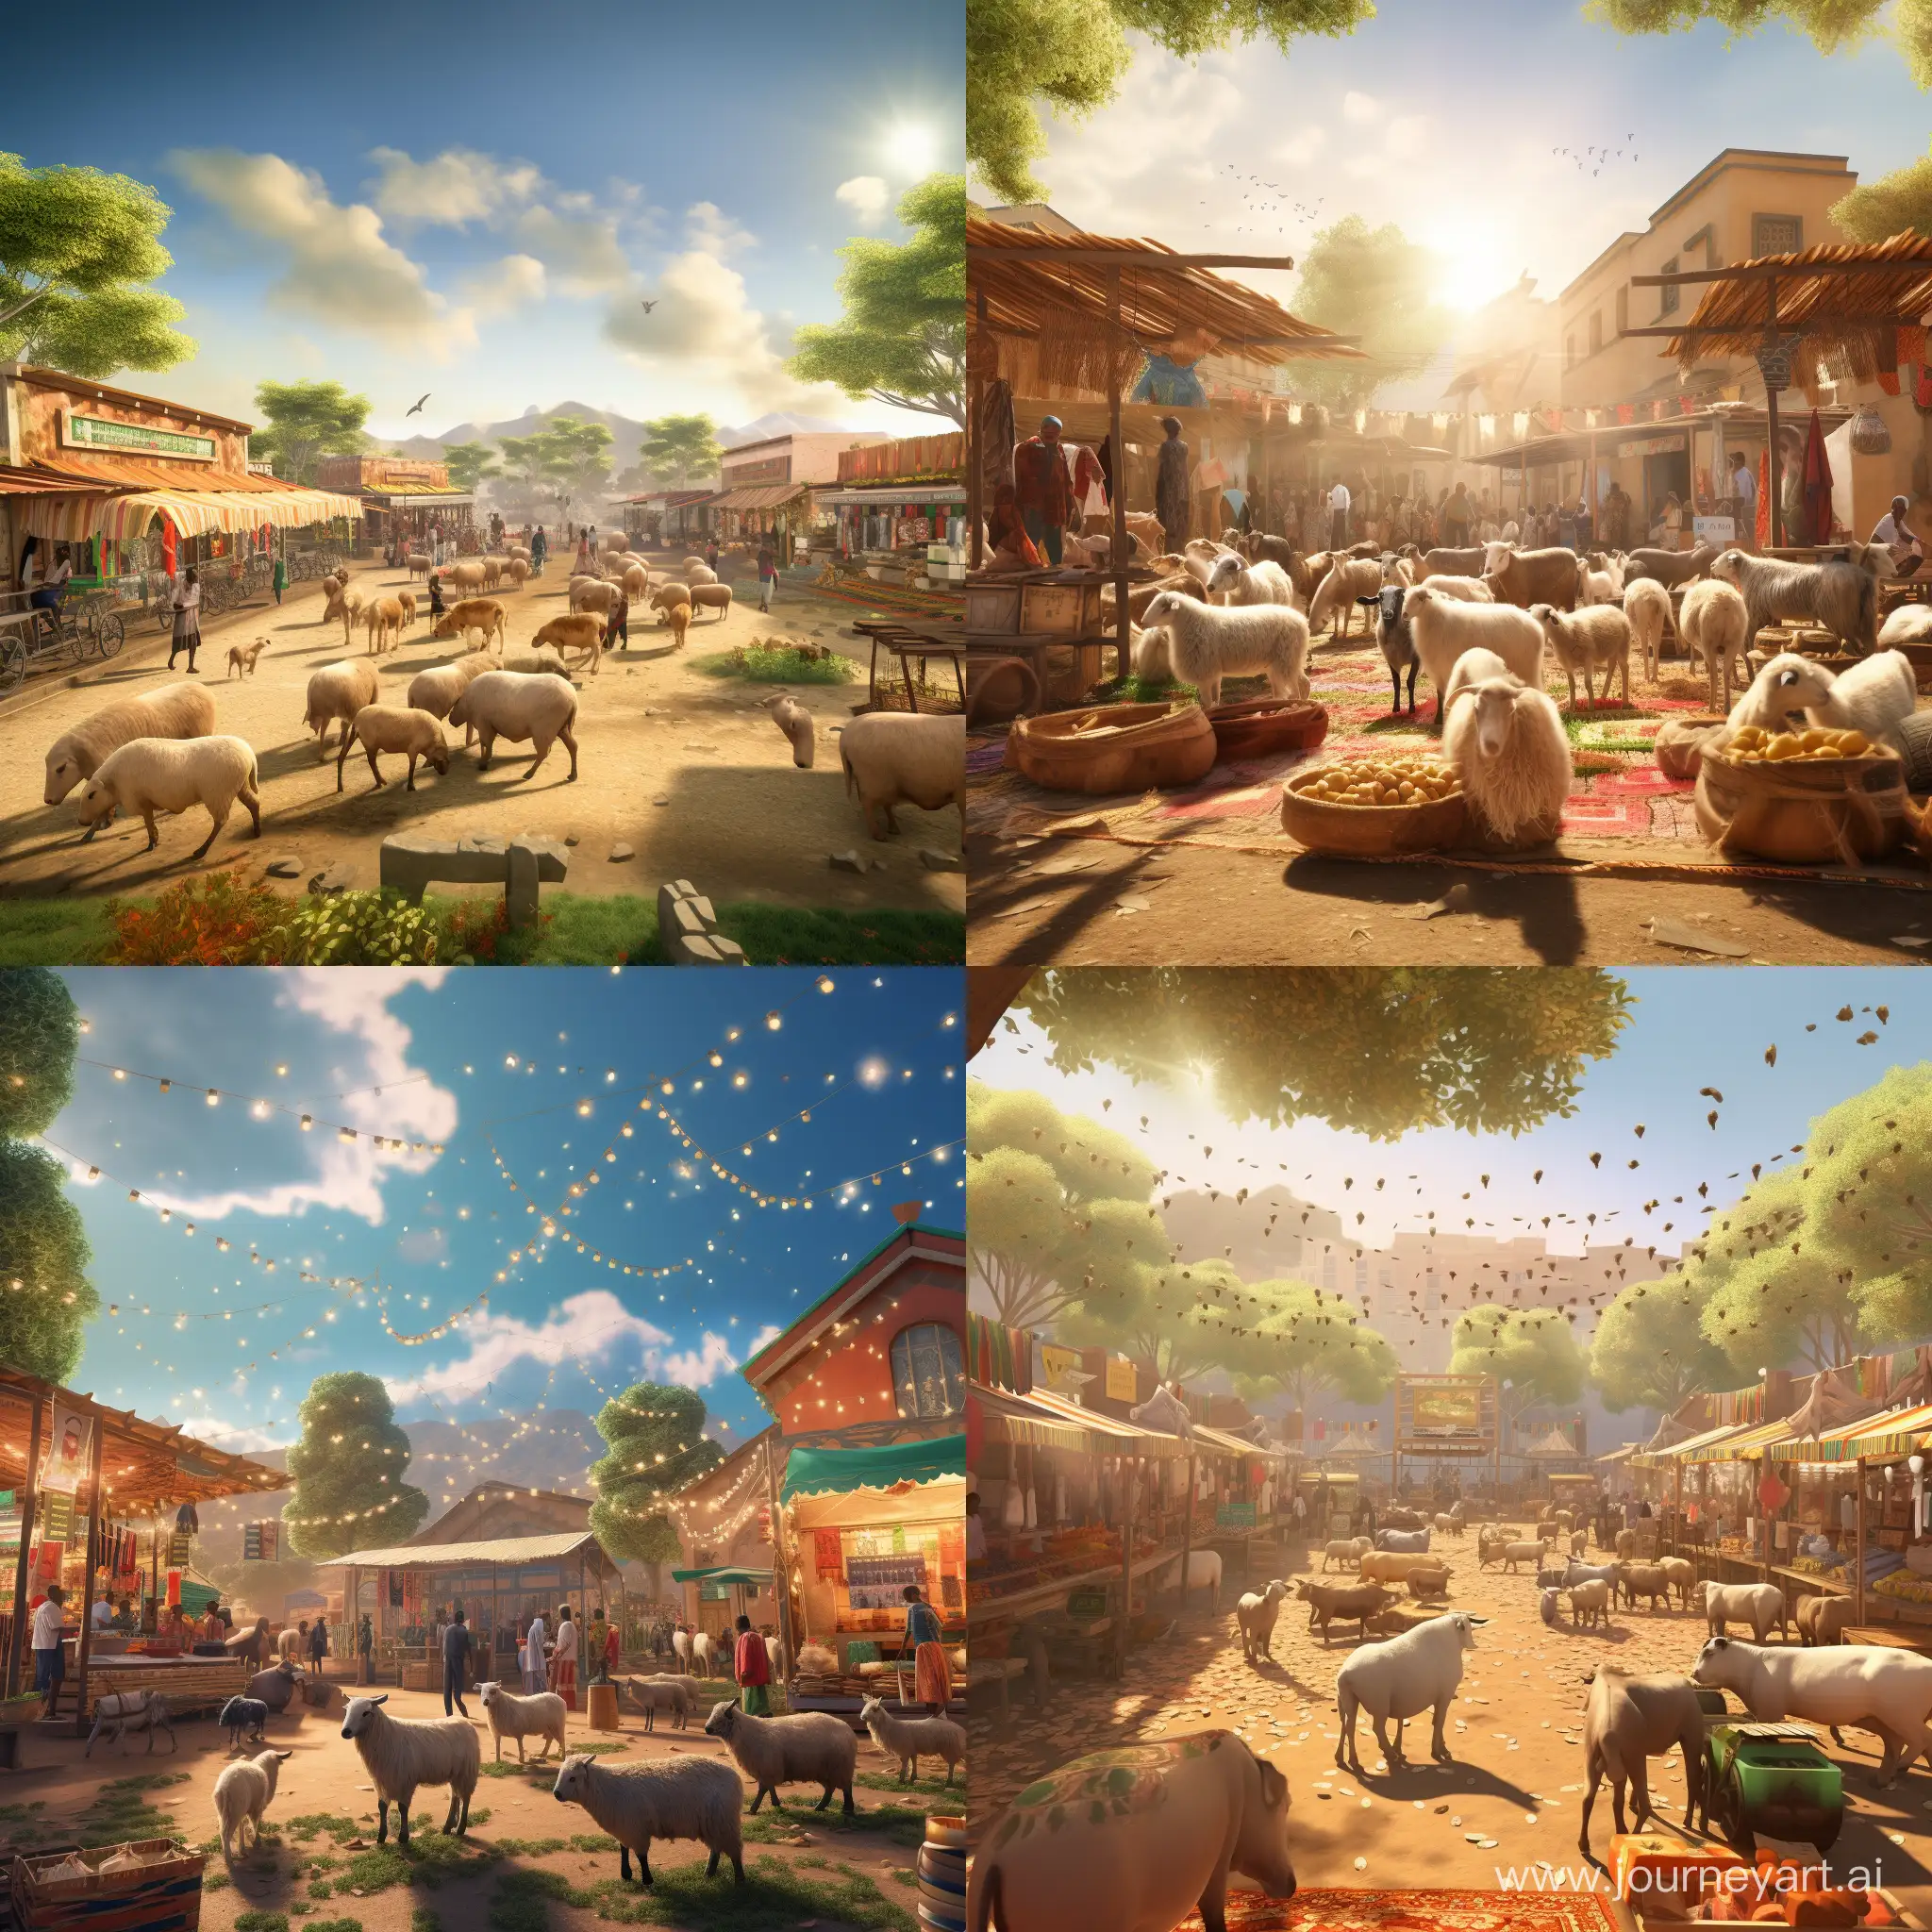 generate image of sheep, goat and cattle marketplace in stylish way they are laughing on buyers. The place is bright light and hot market in Ethiopia, 3d animation style